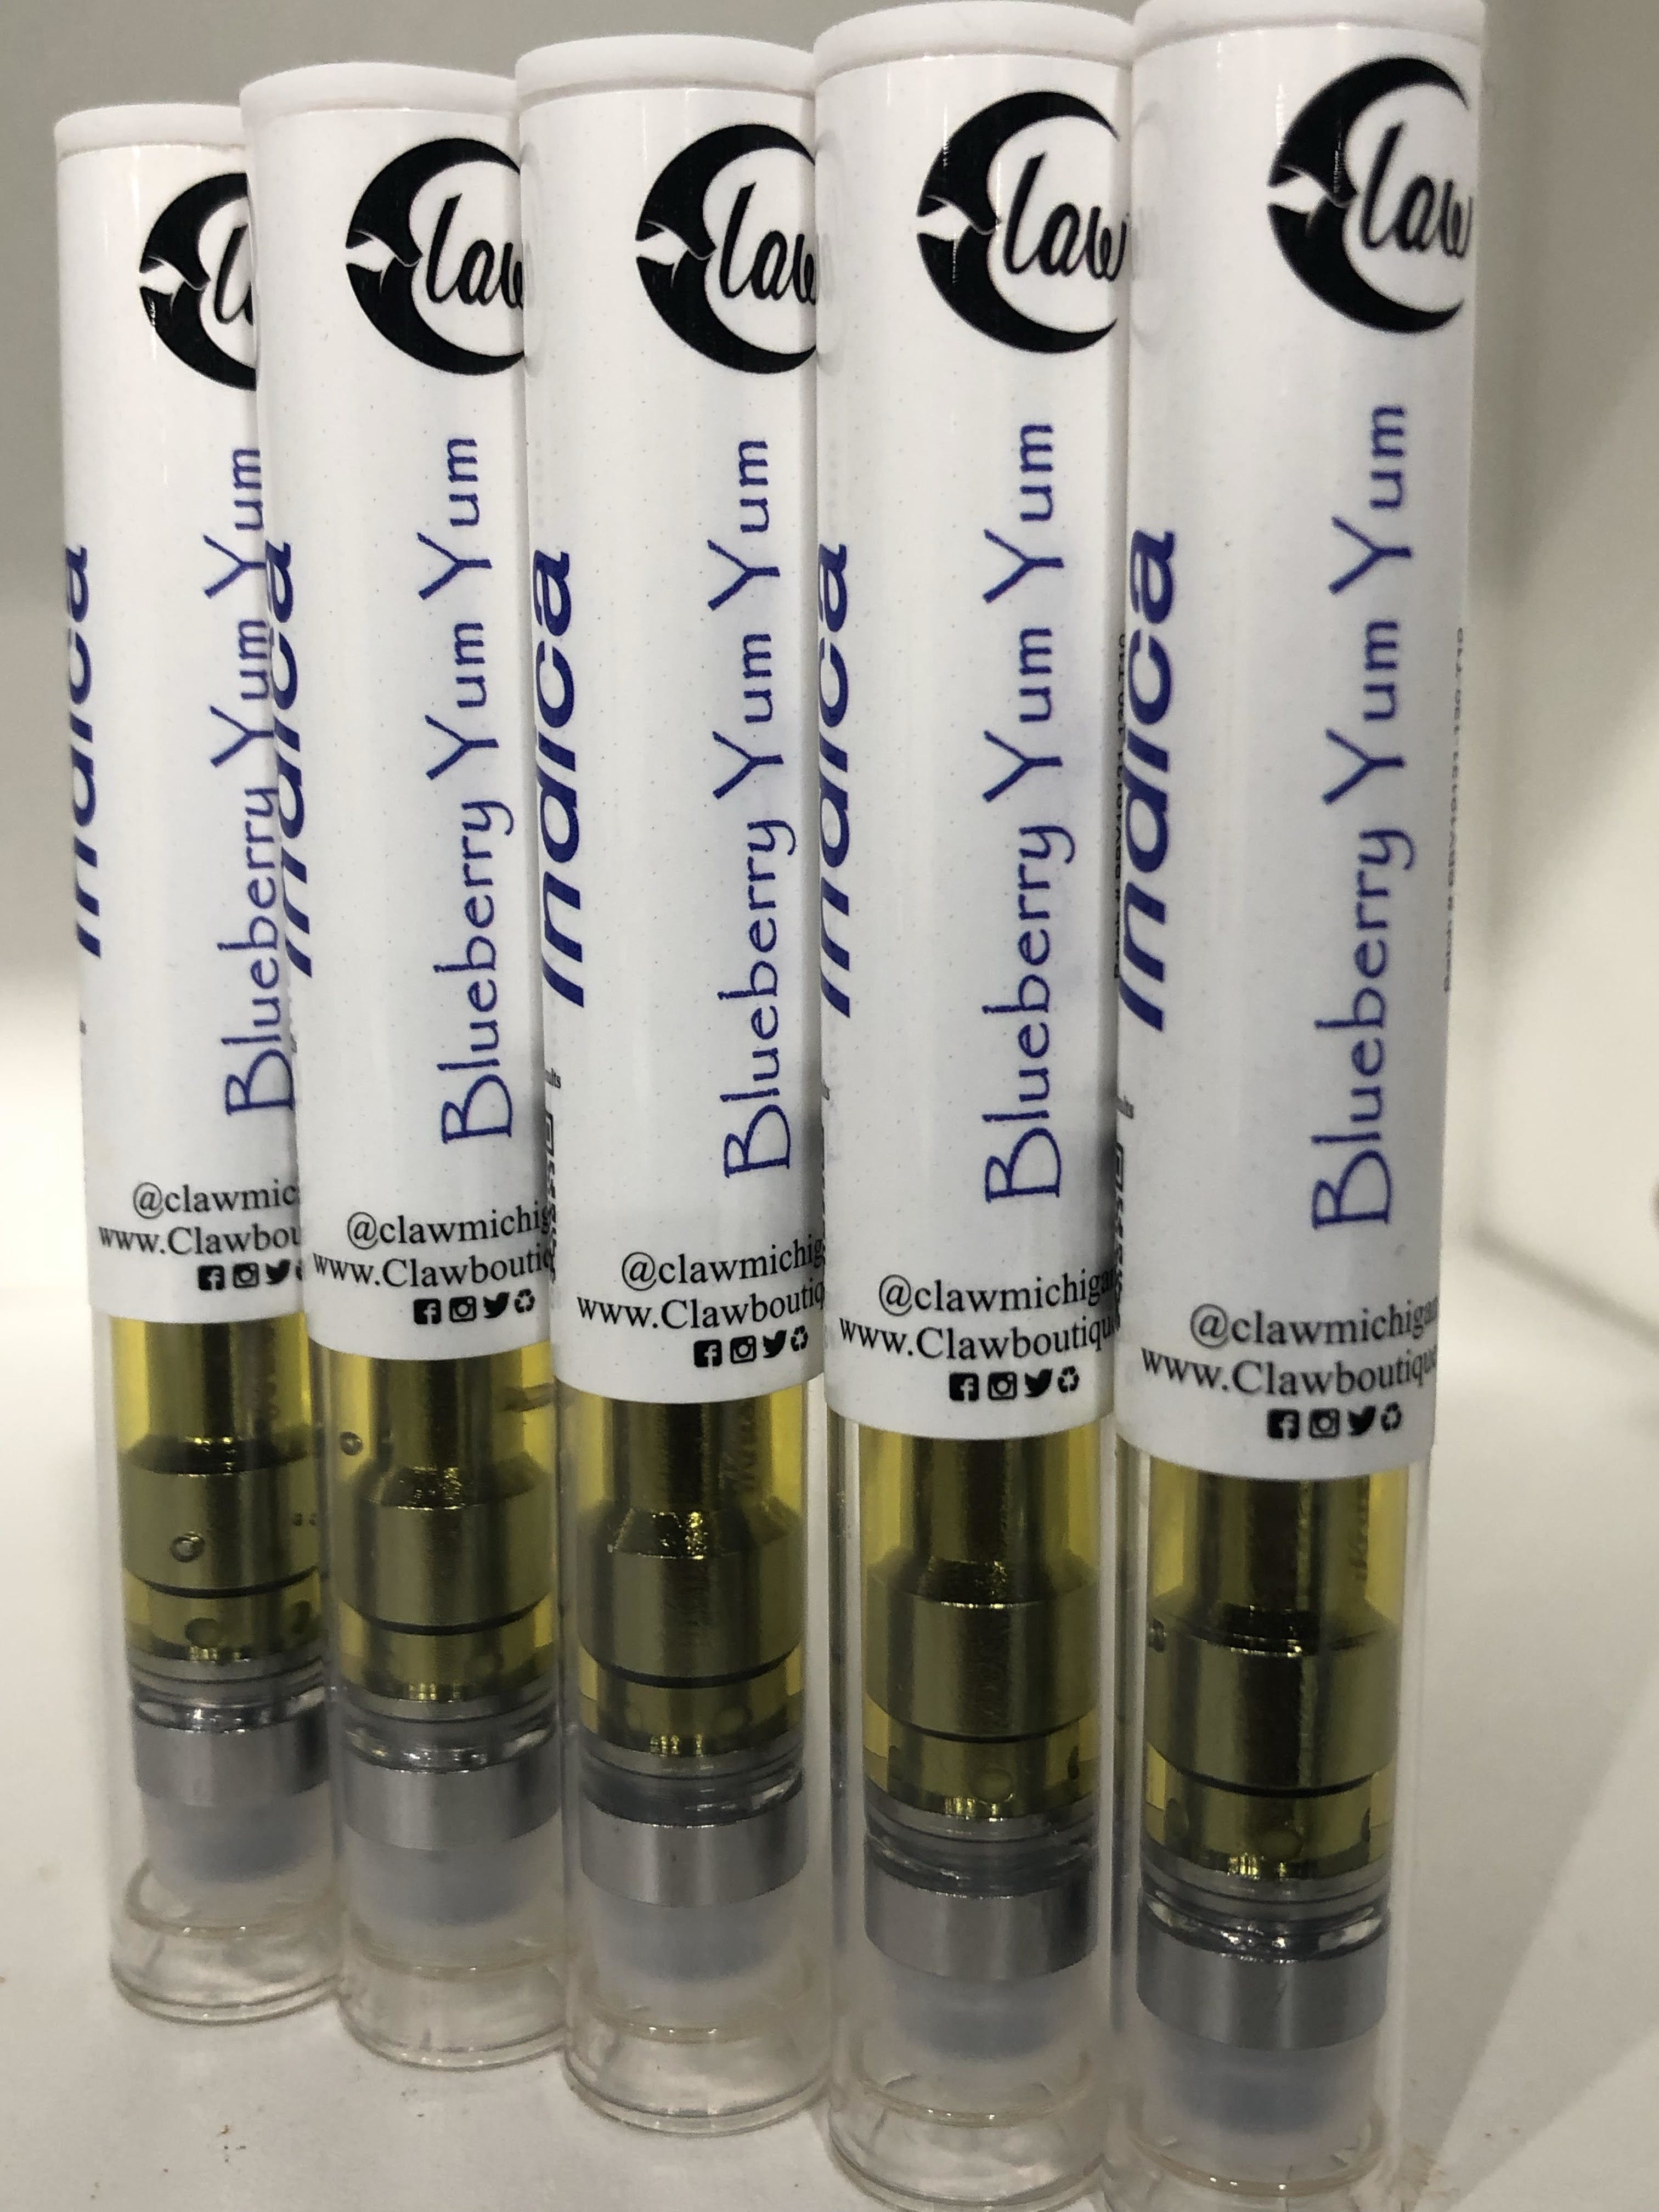 concentrate-claw-concentrates-500mg-cart